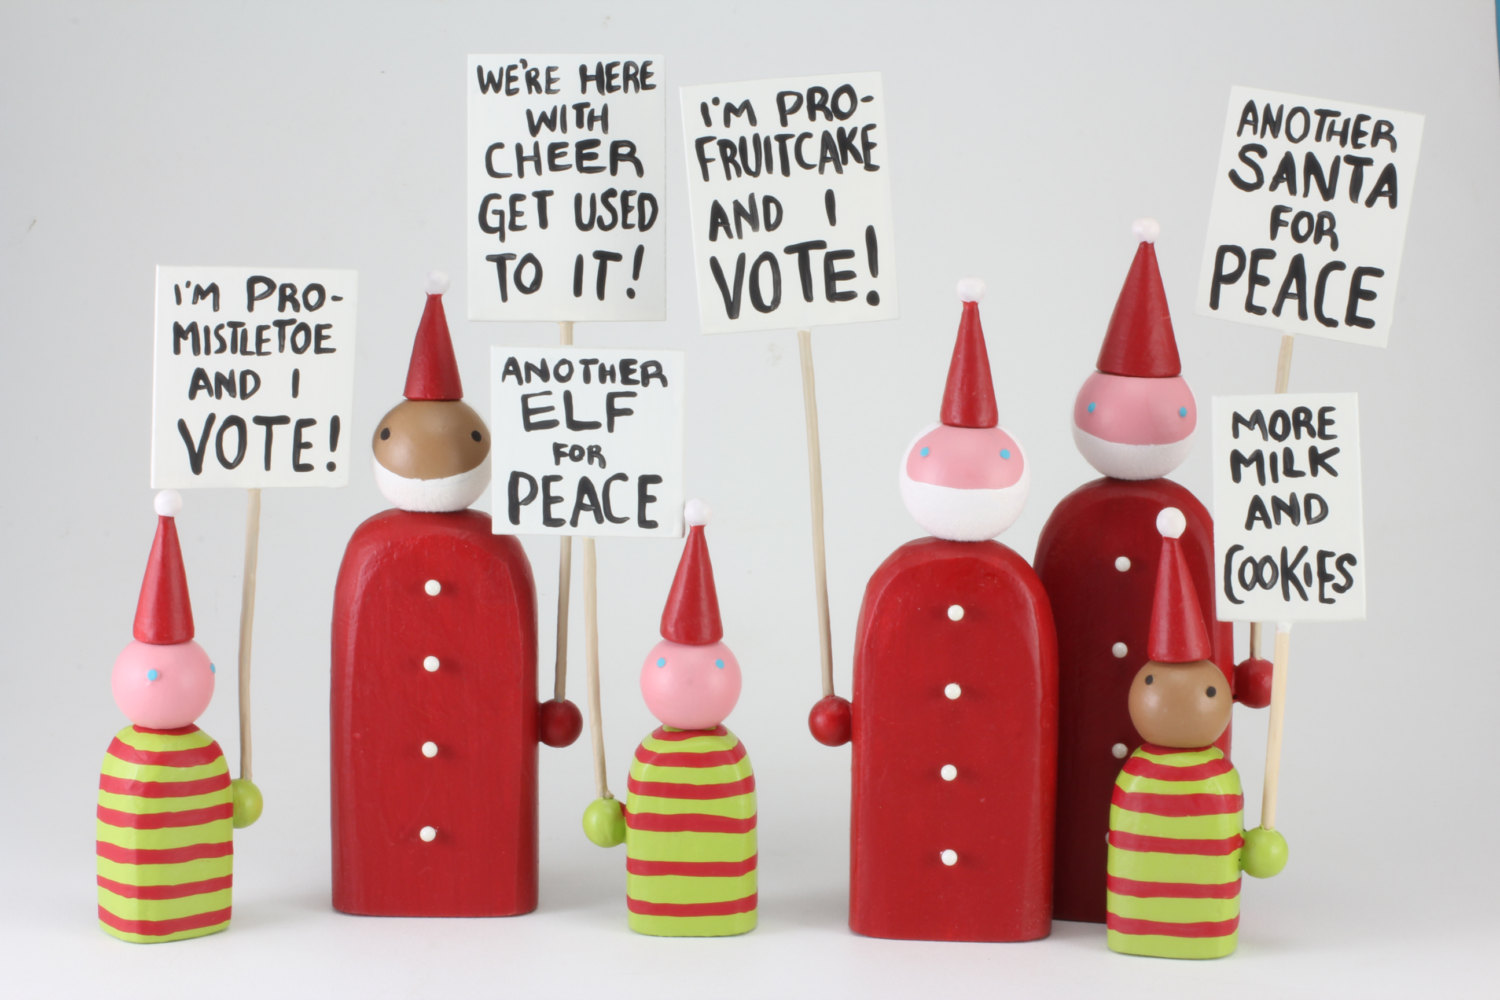 Protesting elf and Santa figurines on Etsy: Hilarious gift for socially active friends with a sense of humor